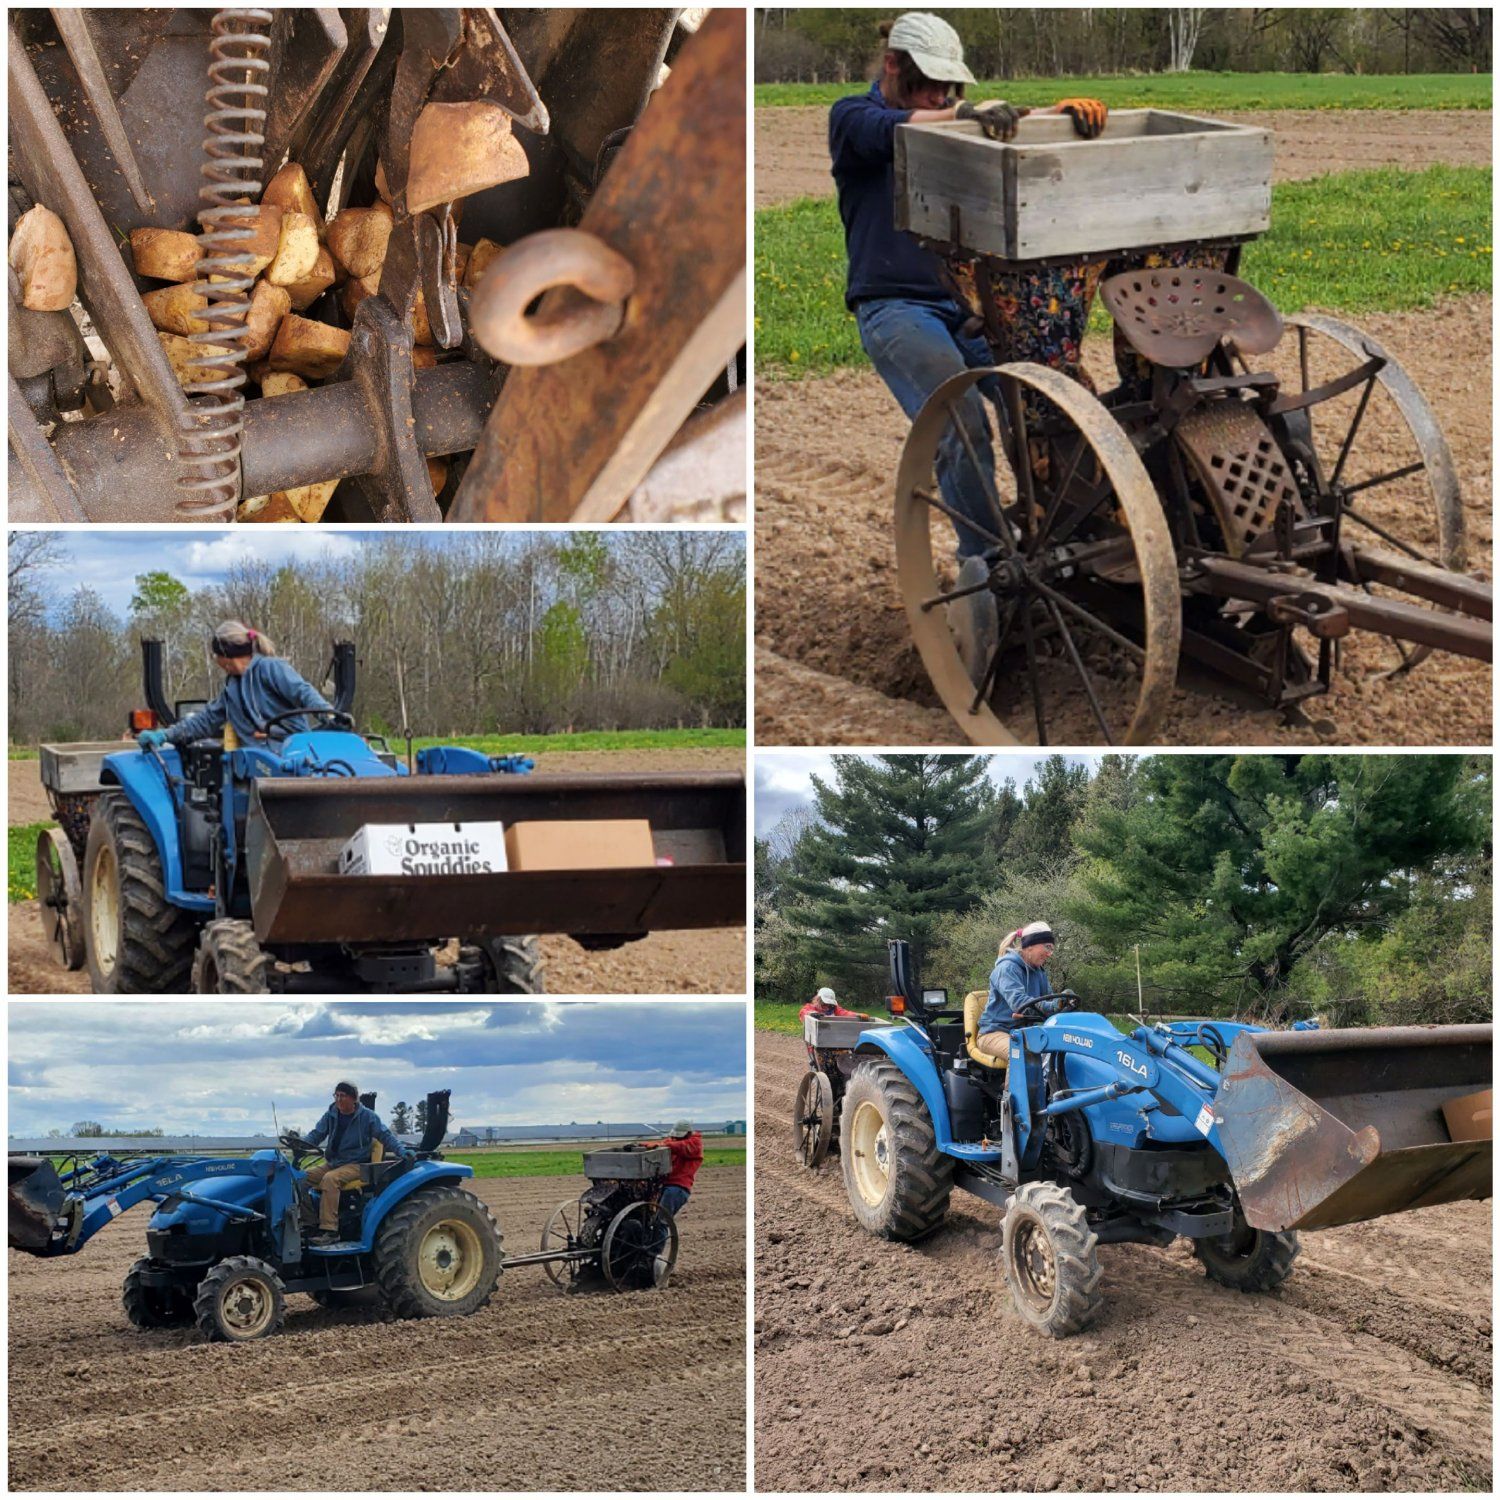 Previous Happening: DragSmith Farms Planting Potatoes